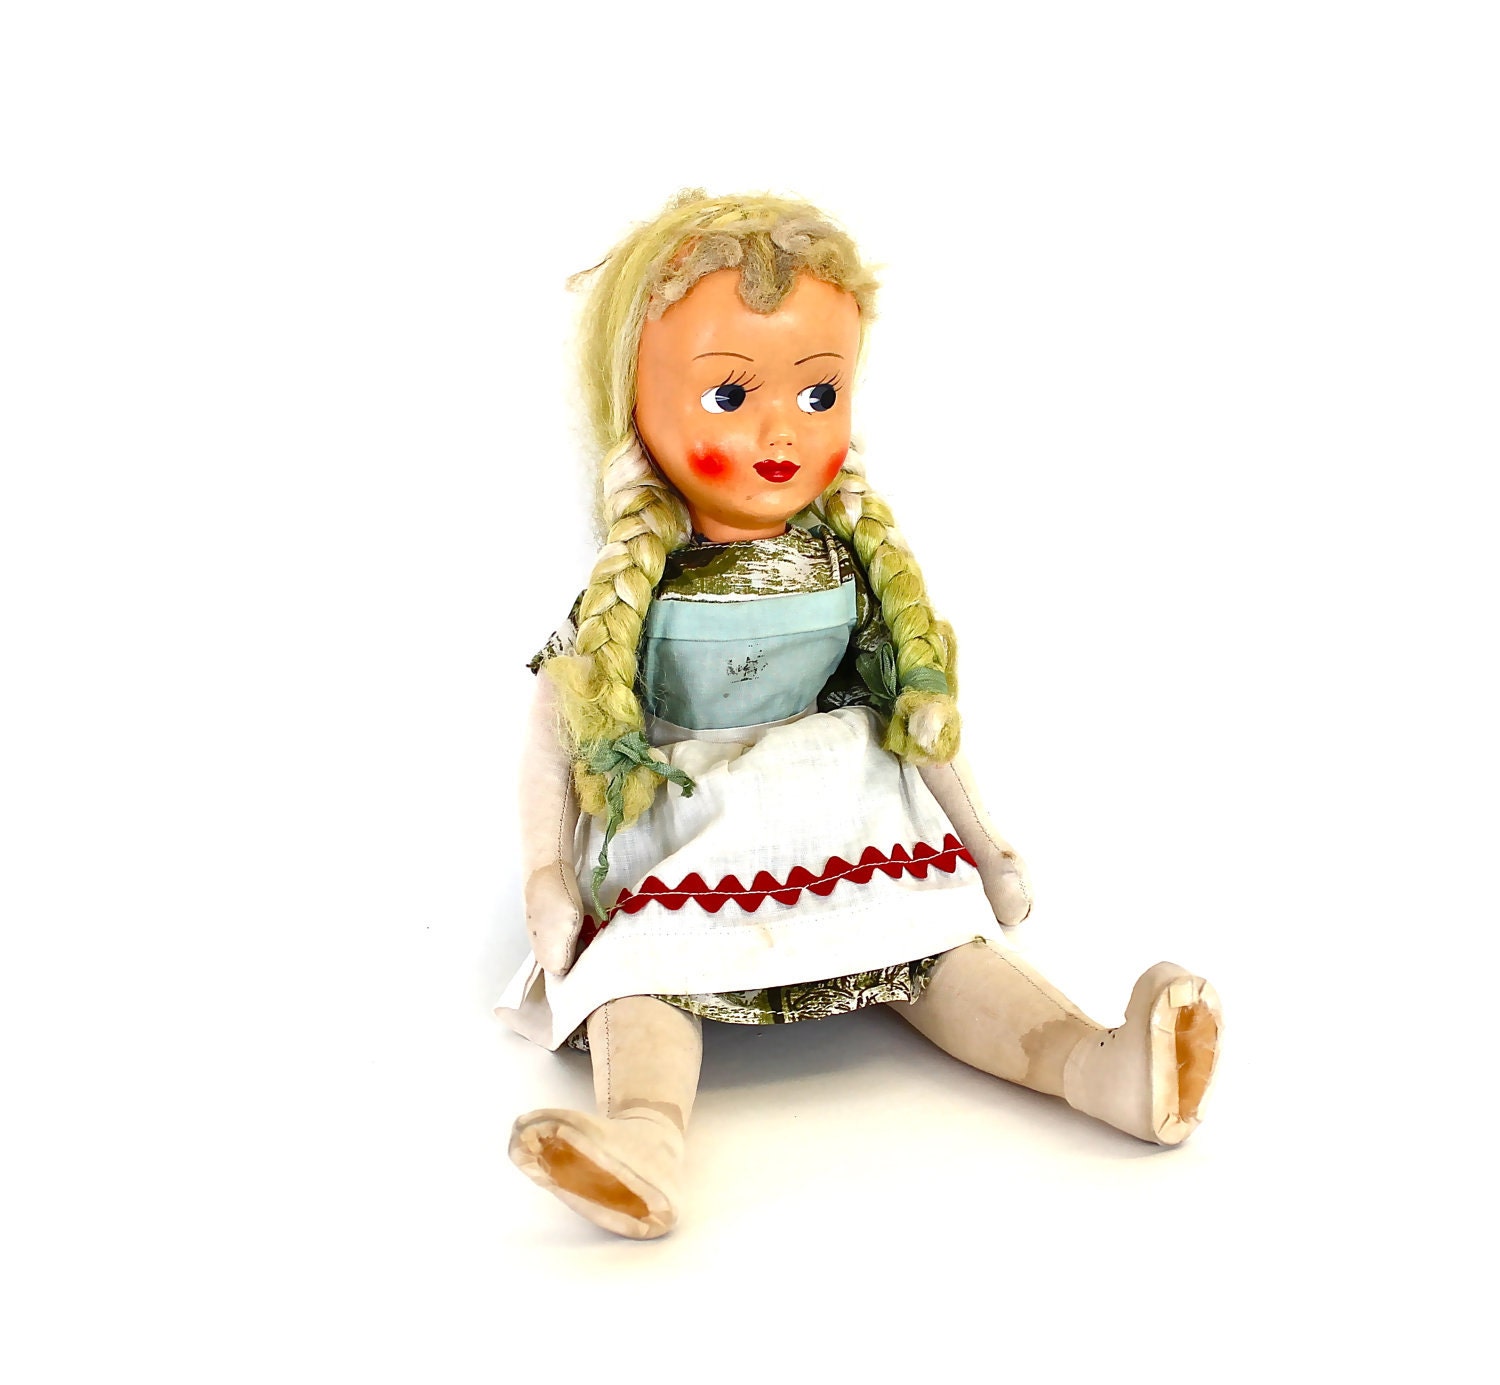 From the Lime Orchard - Vintage Cloth Doll